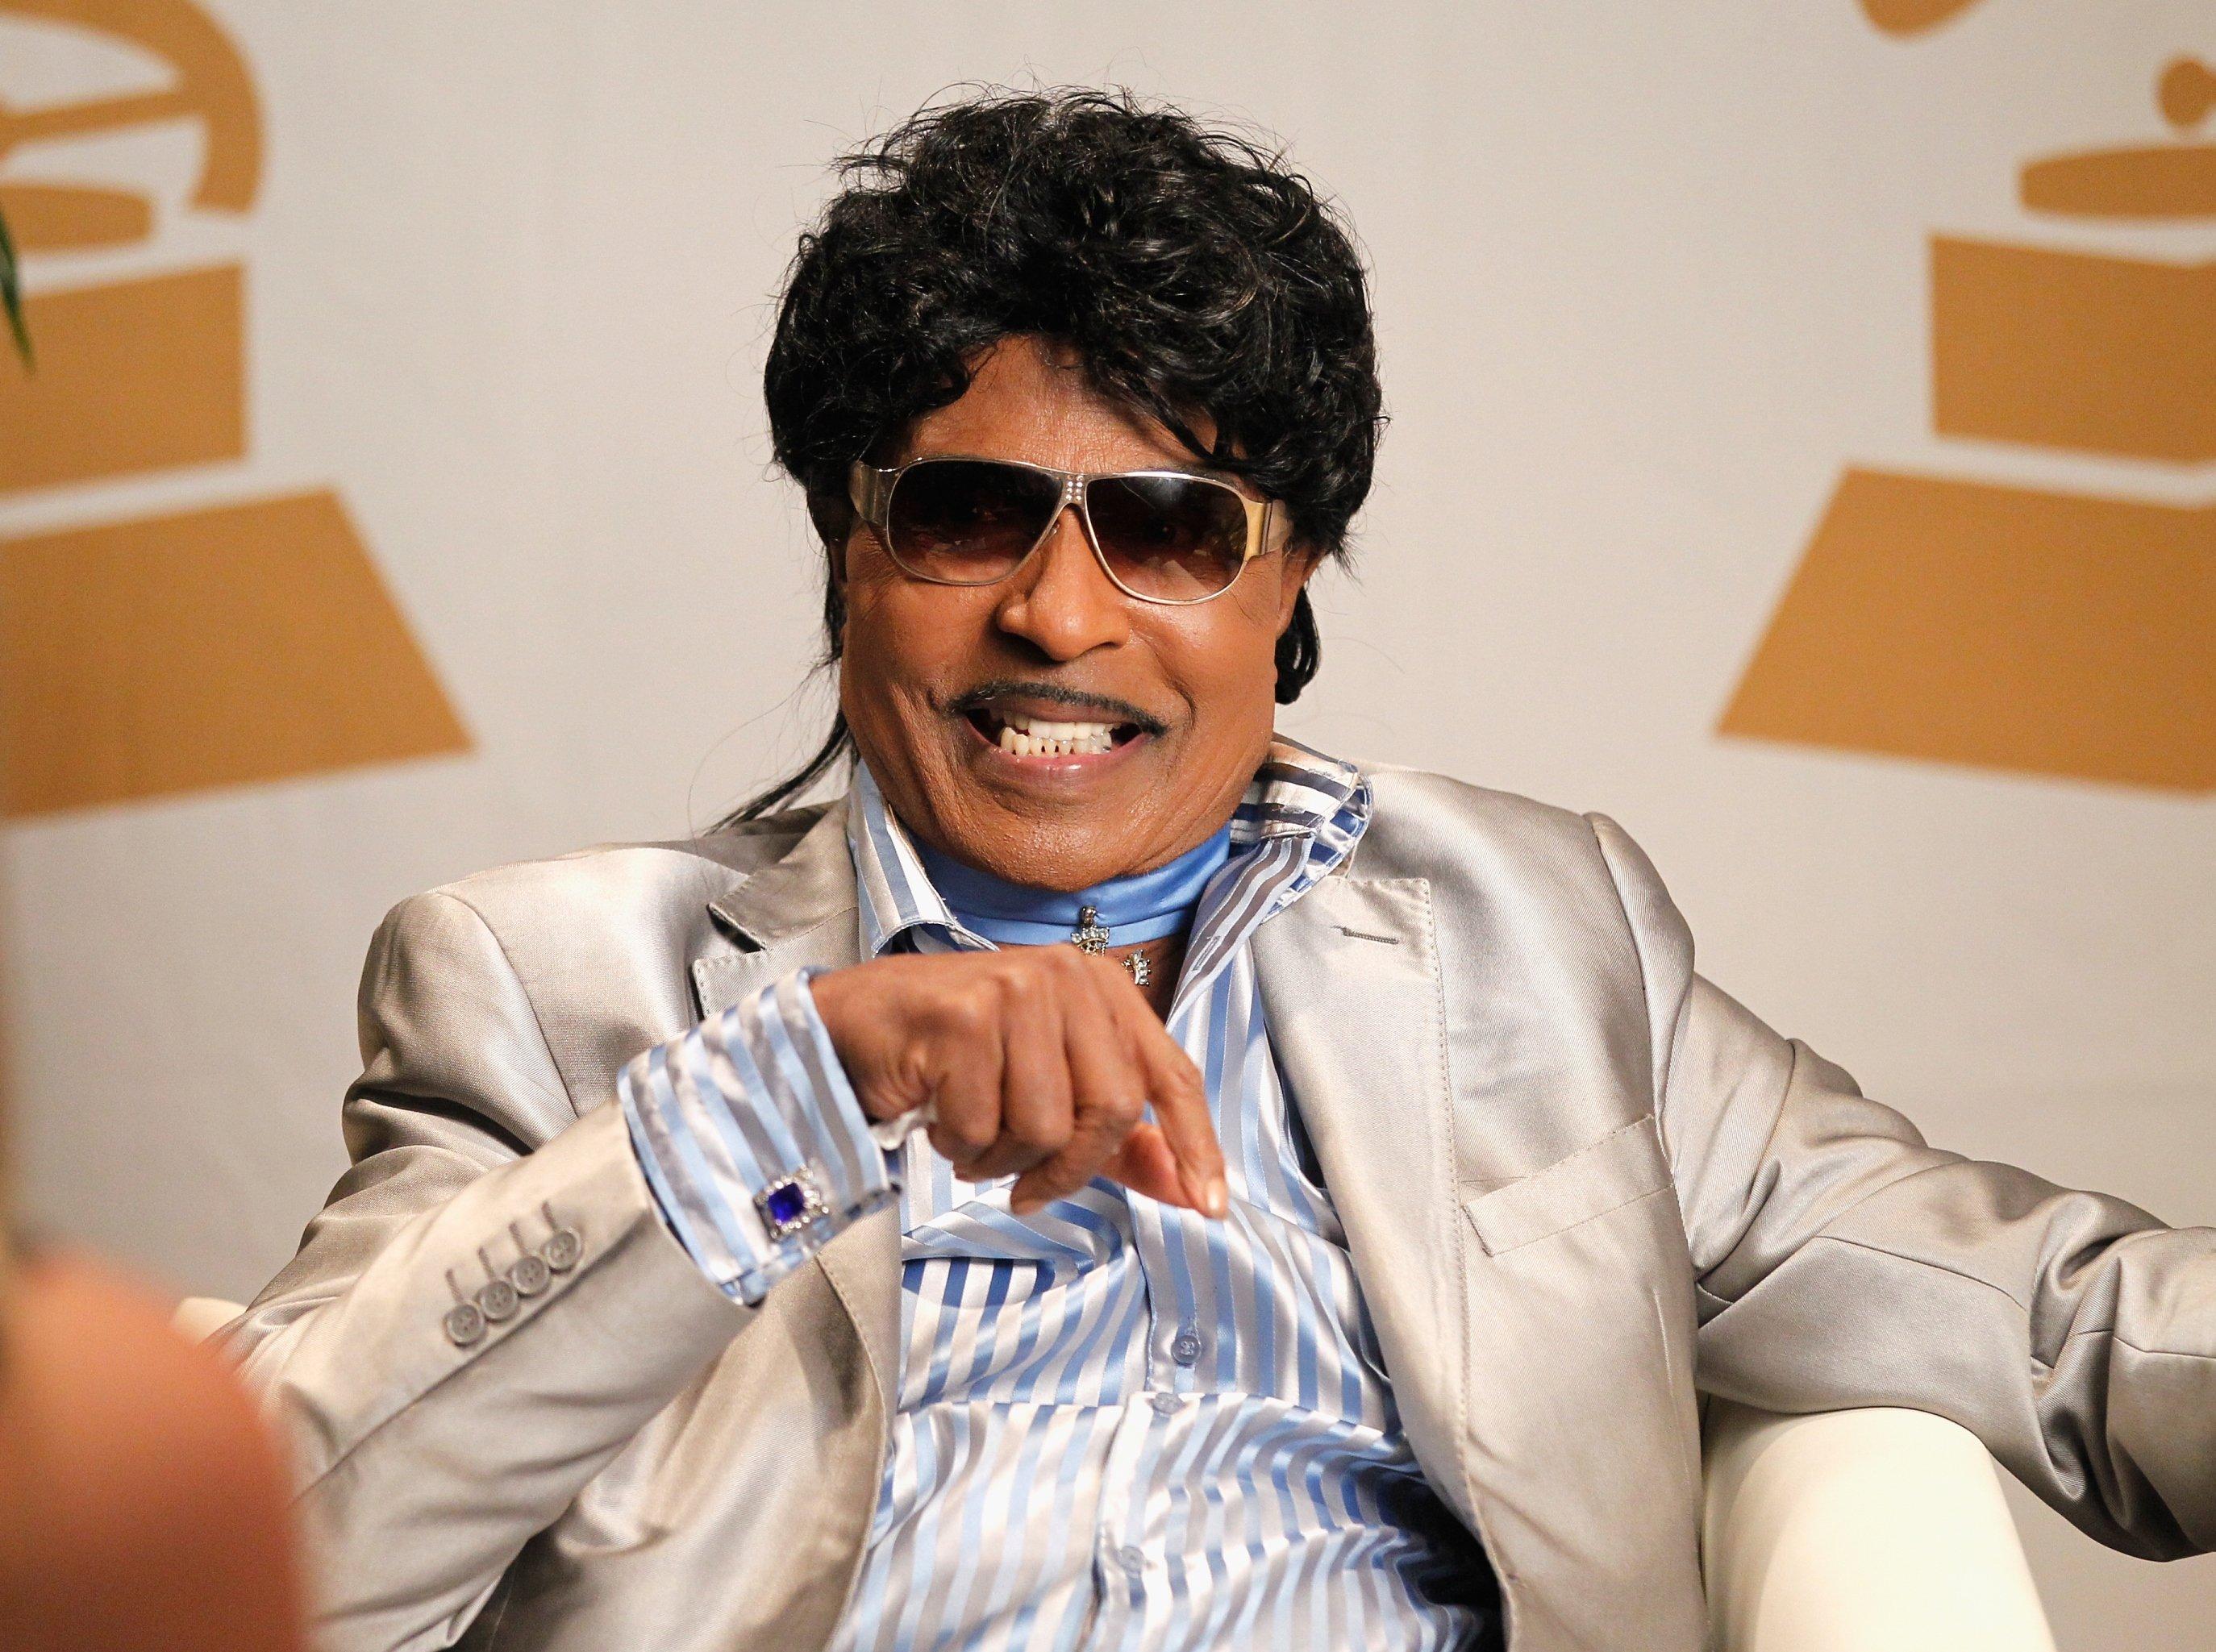 Little Richard photographed in 2013